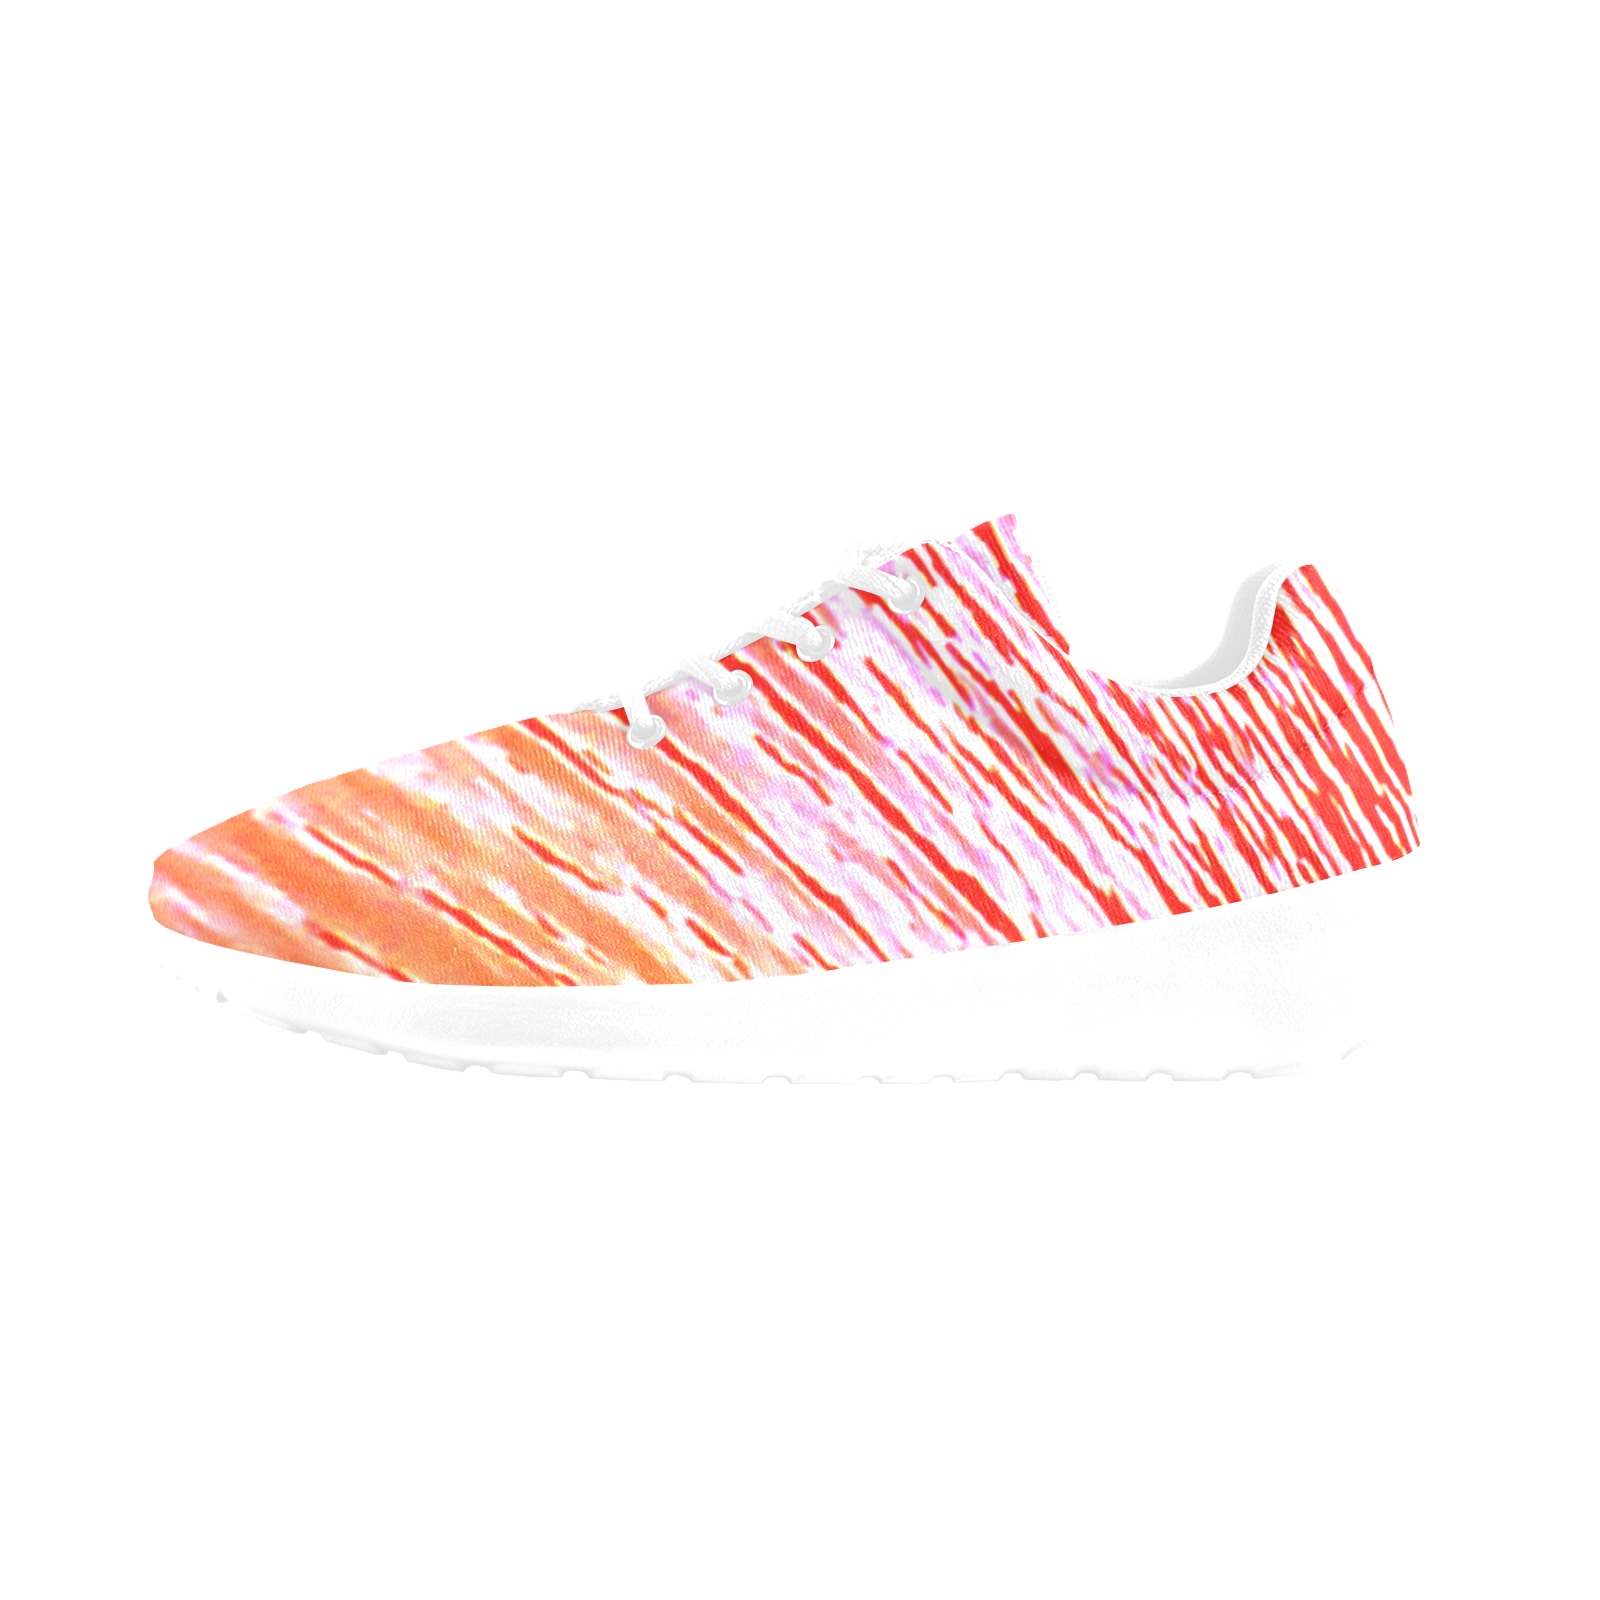 Orange and red water Women's Athletic Shoes (Model 0200)